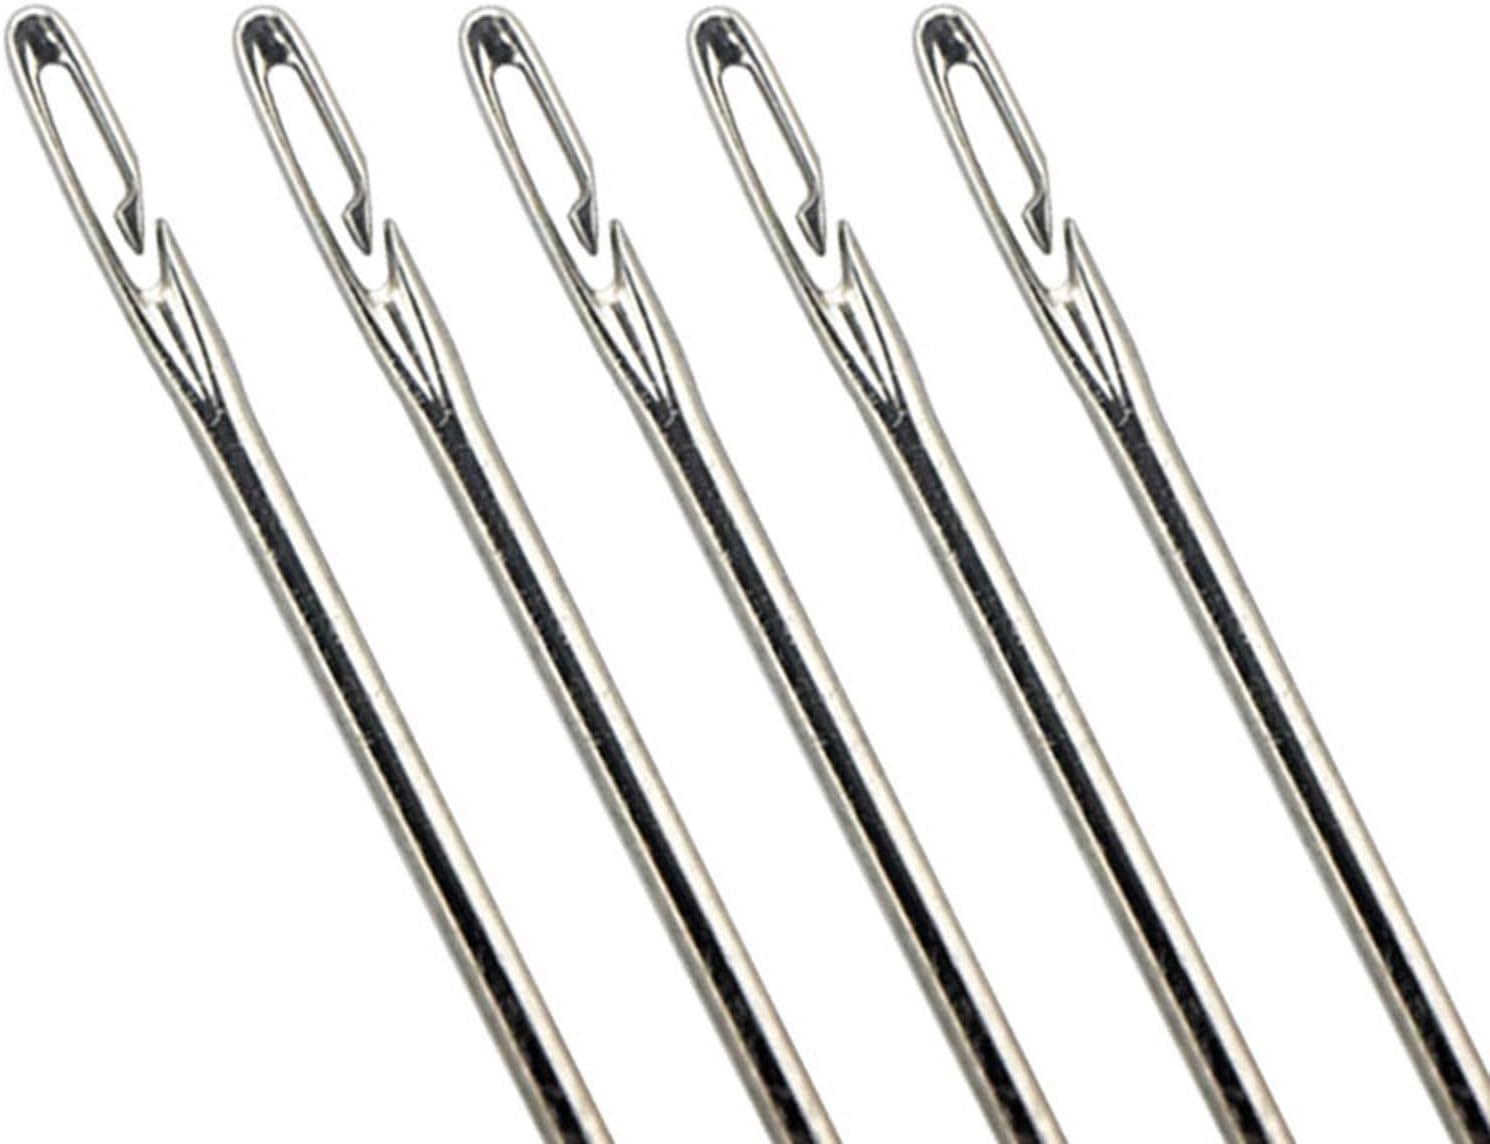 54pcs Stainless Steel Needle, Embroidery Needles For Hand Sewing, Easy Side  Threading, Stitching Tools